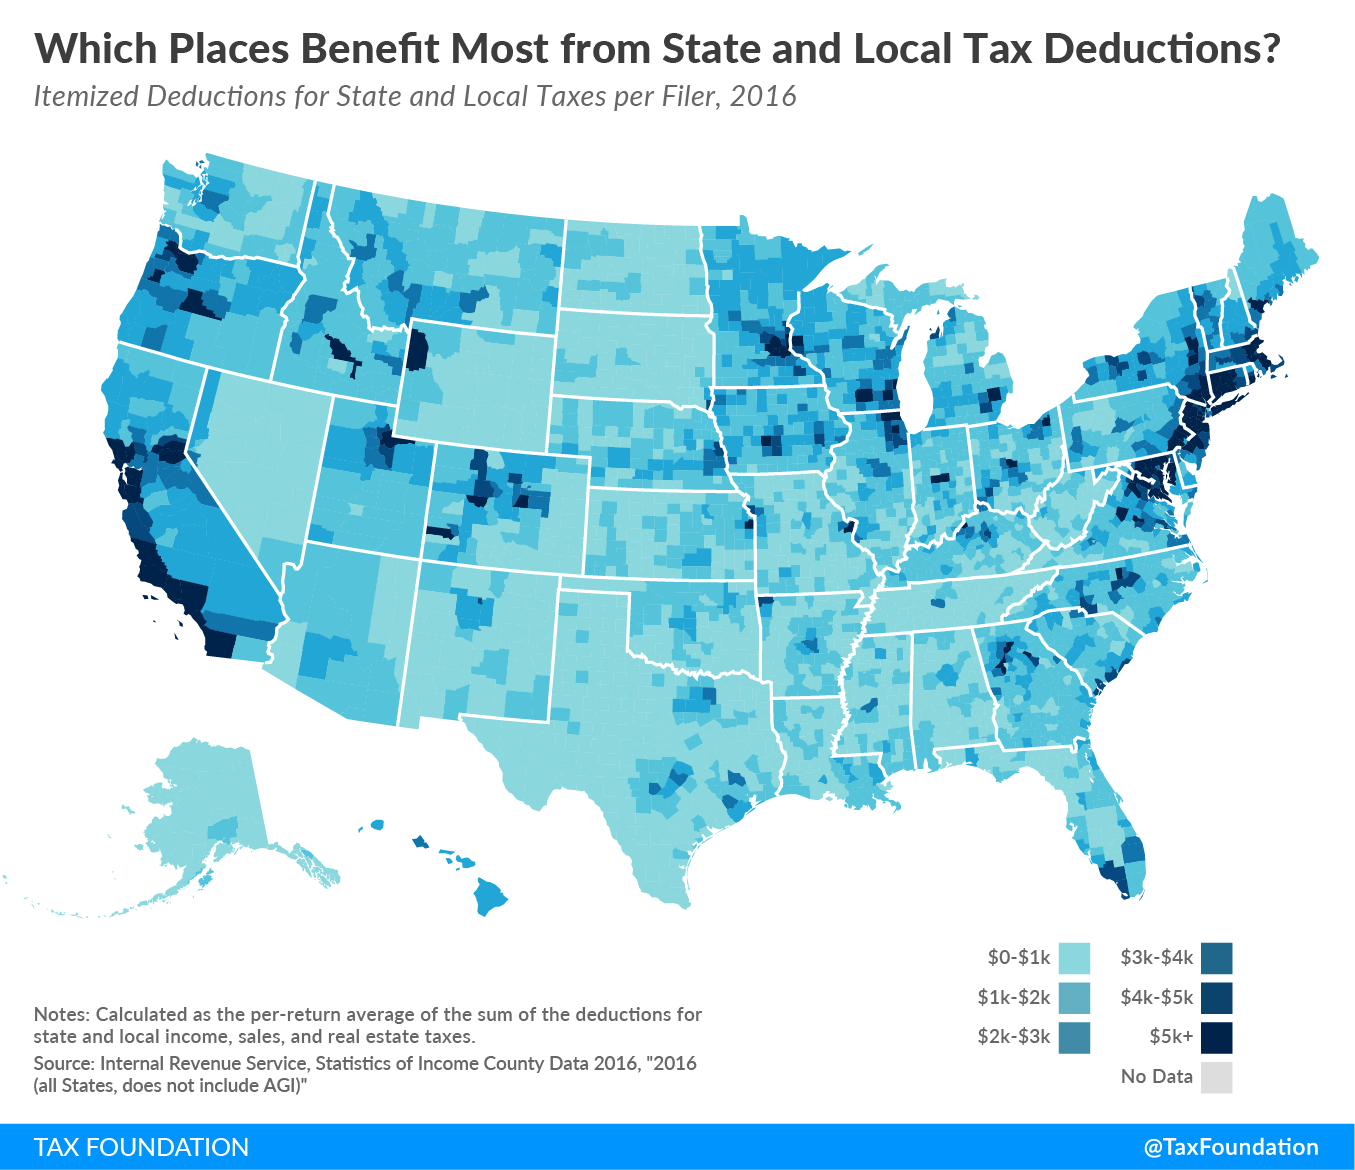 Who Benefits Most from the State and Local Tax Deduction